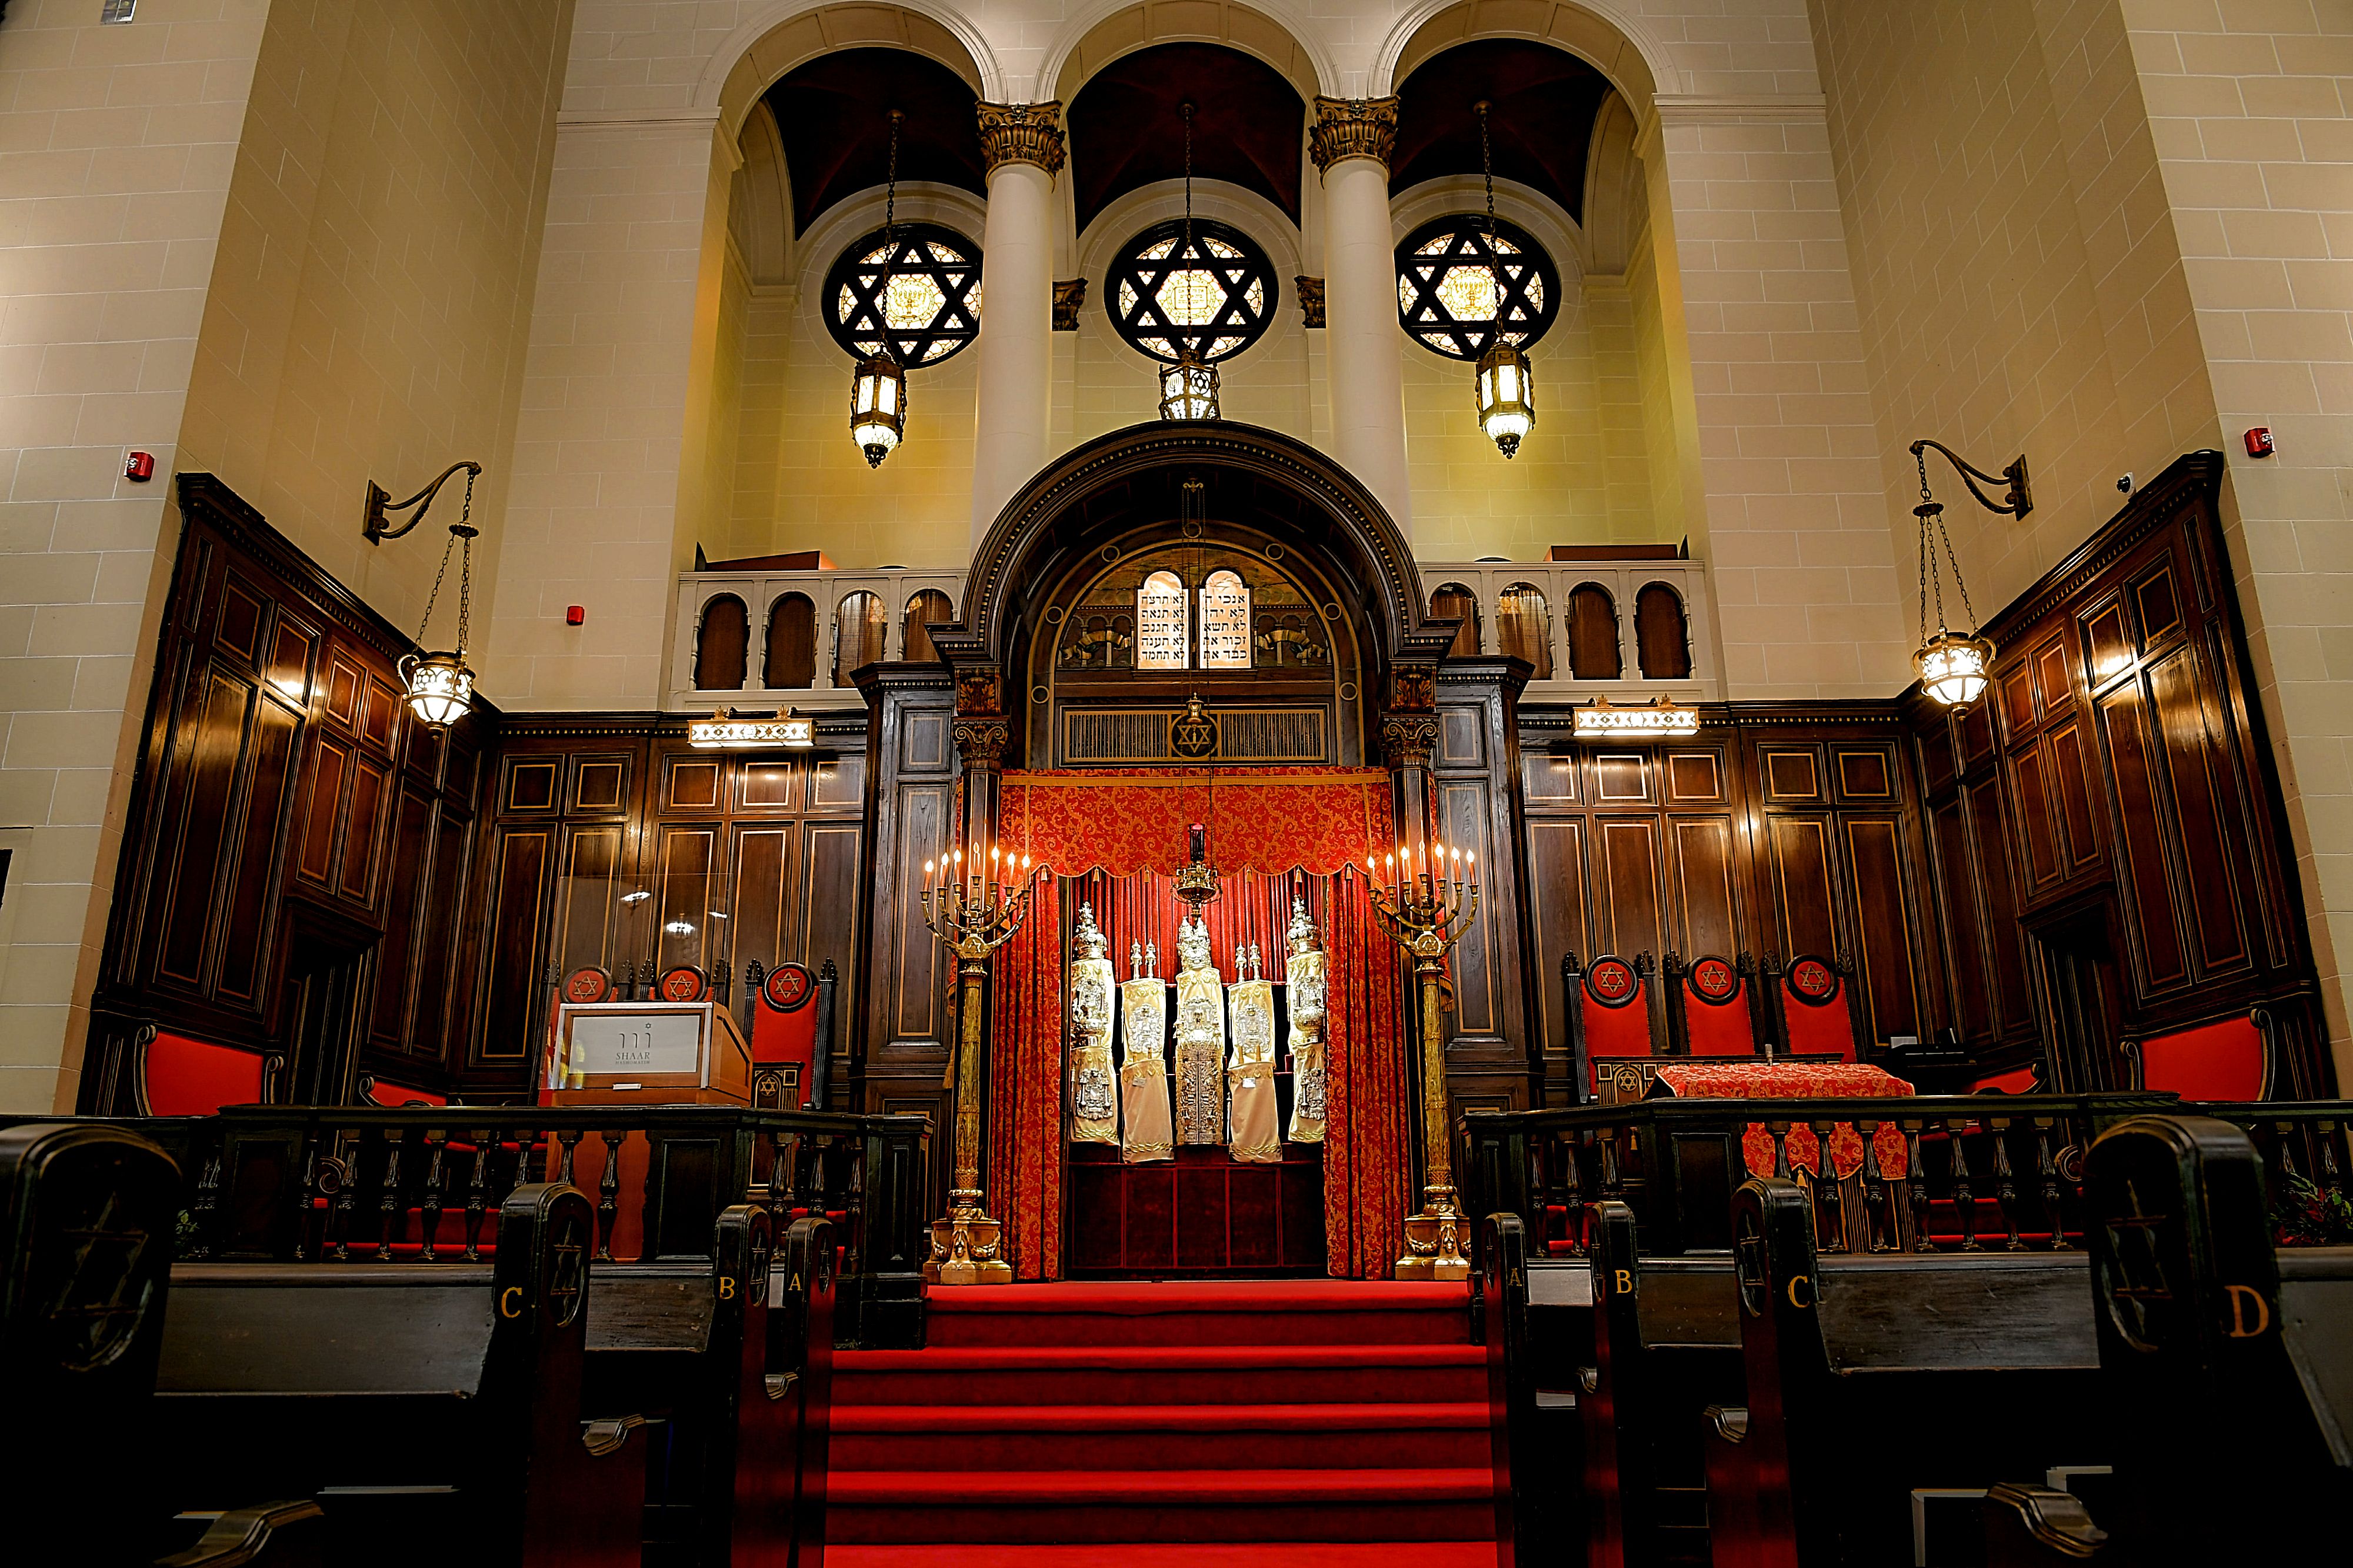 The bimah in a synagogue